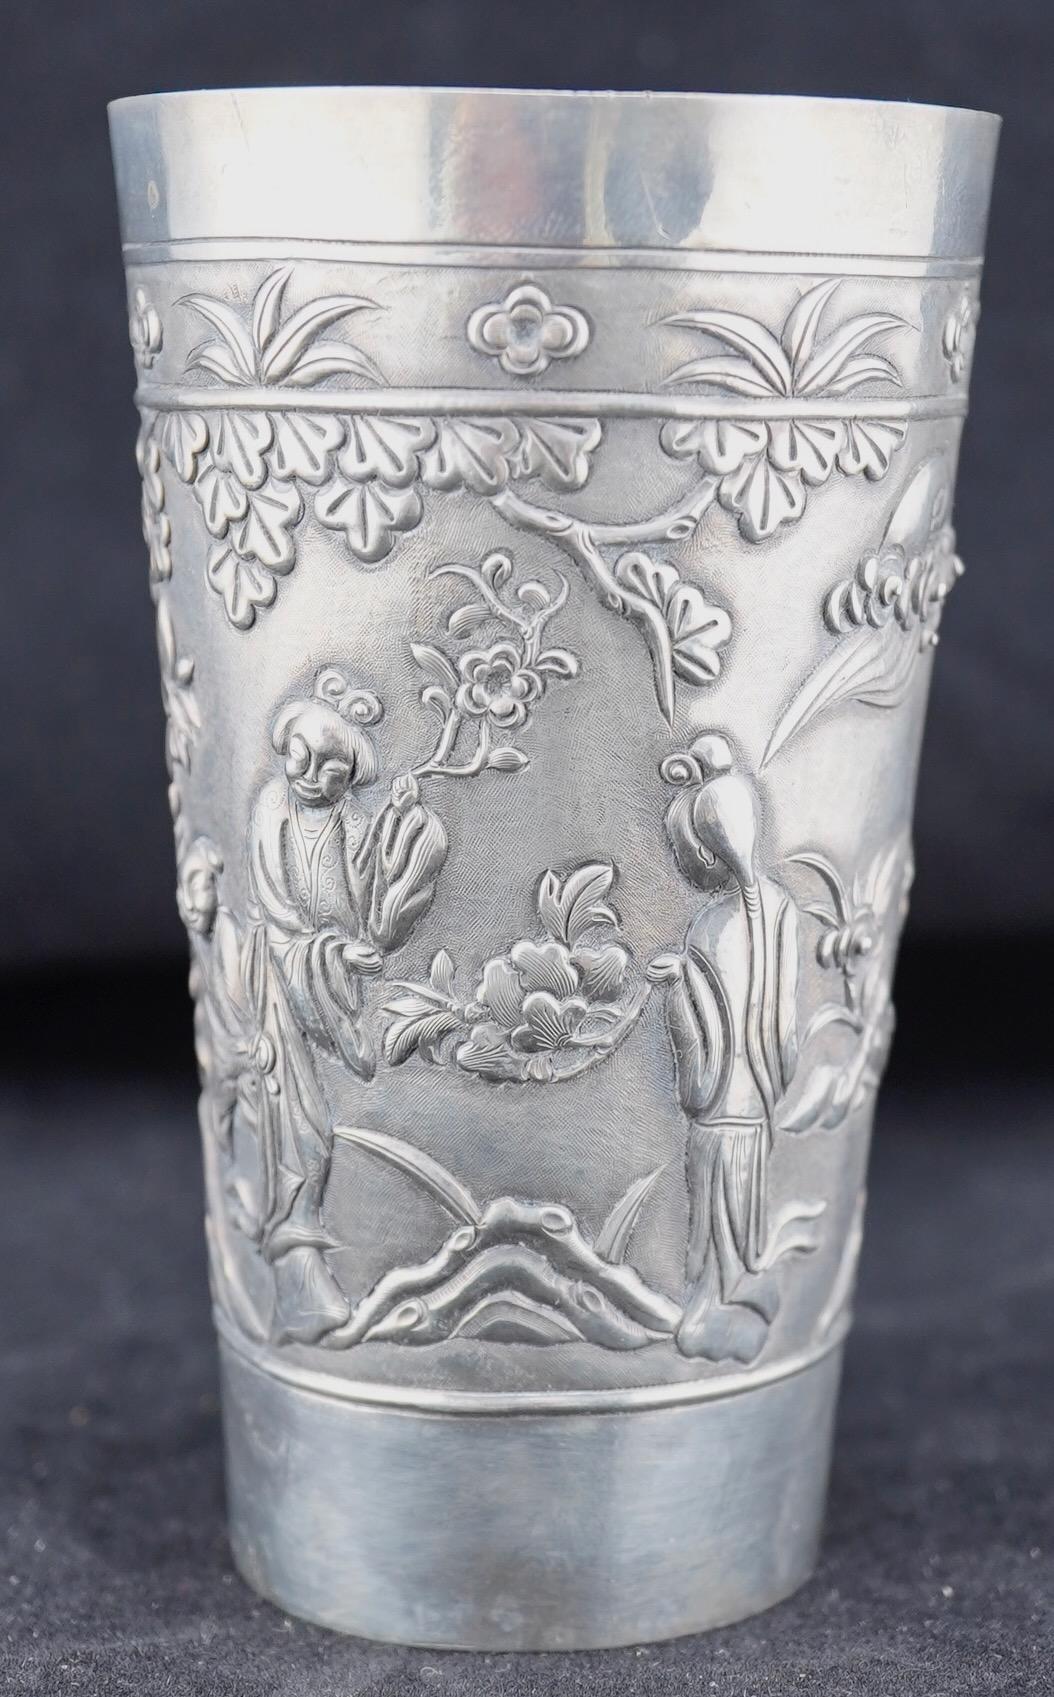 Chinese export repousse beaker, circ 1890. Wieght 3.3 oz., 4 3/8